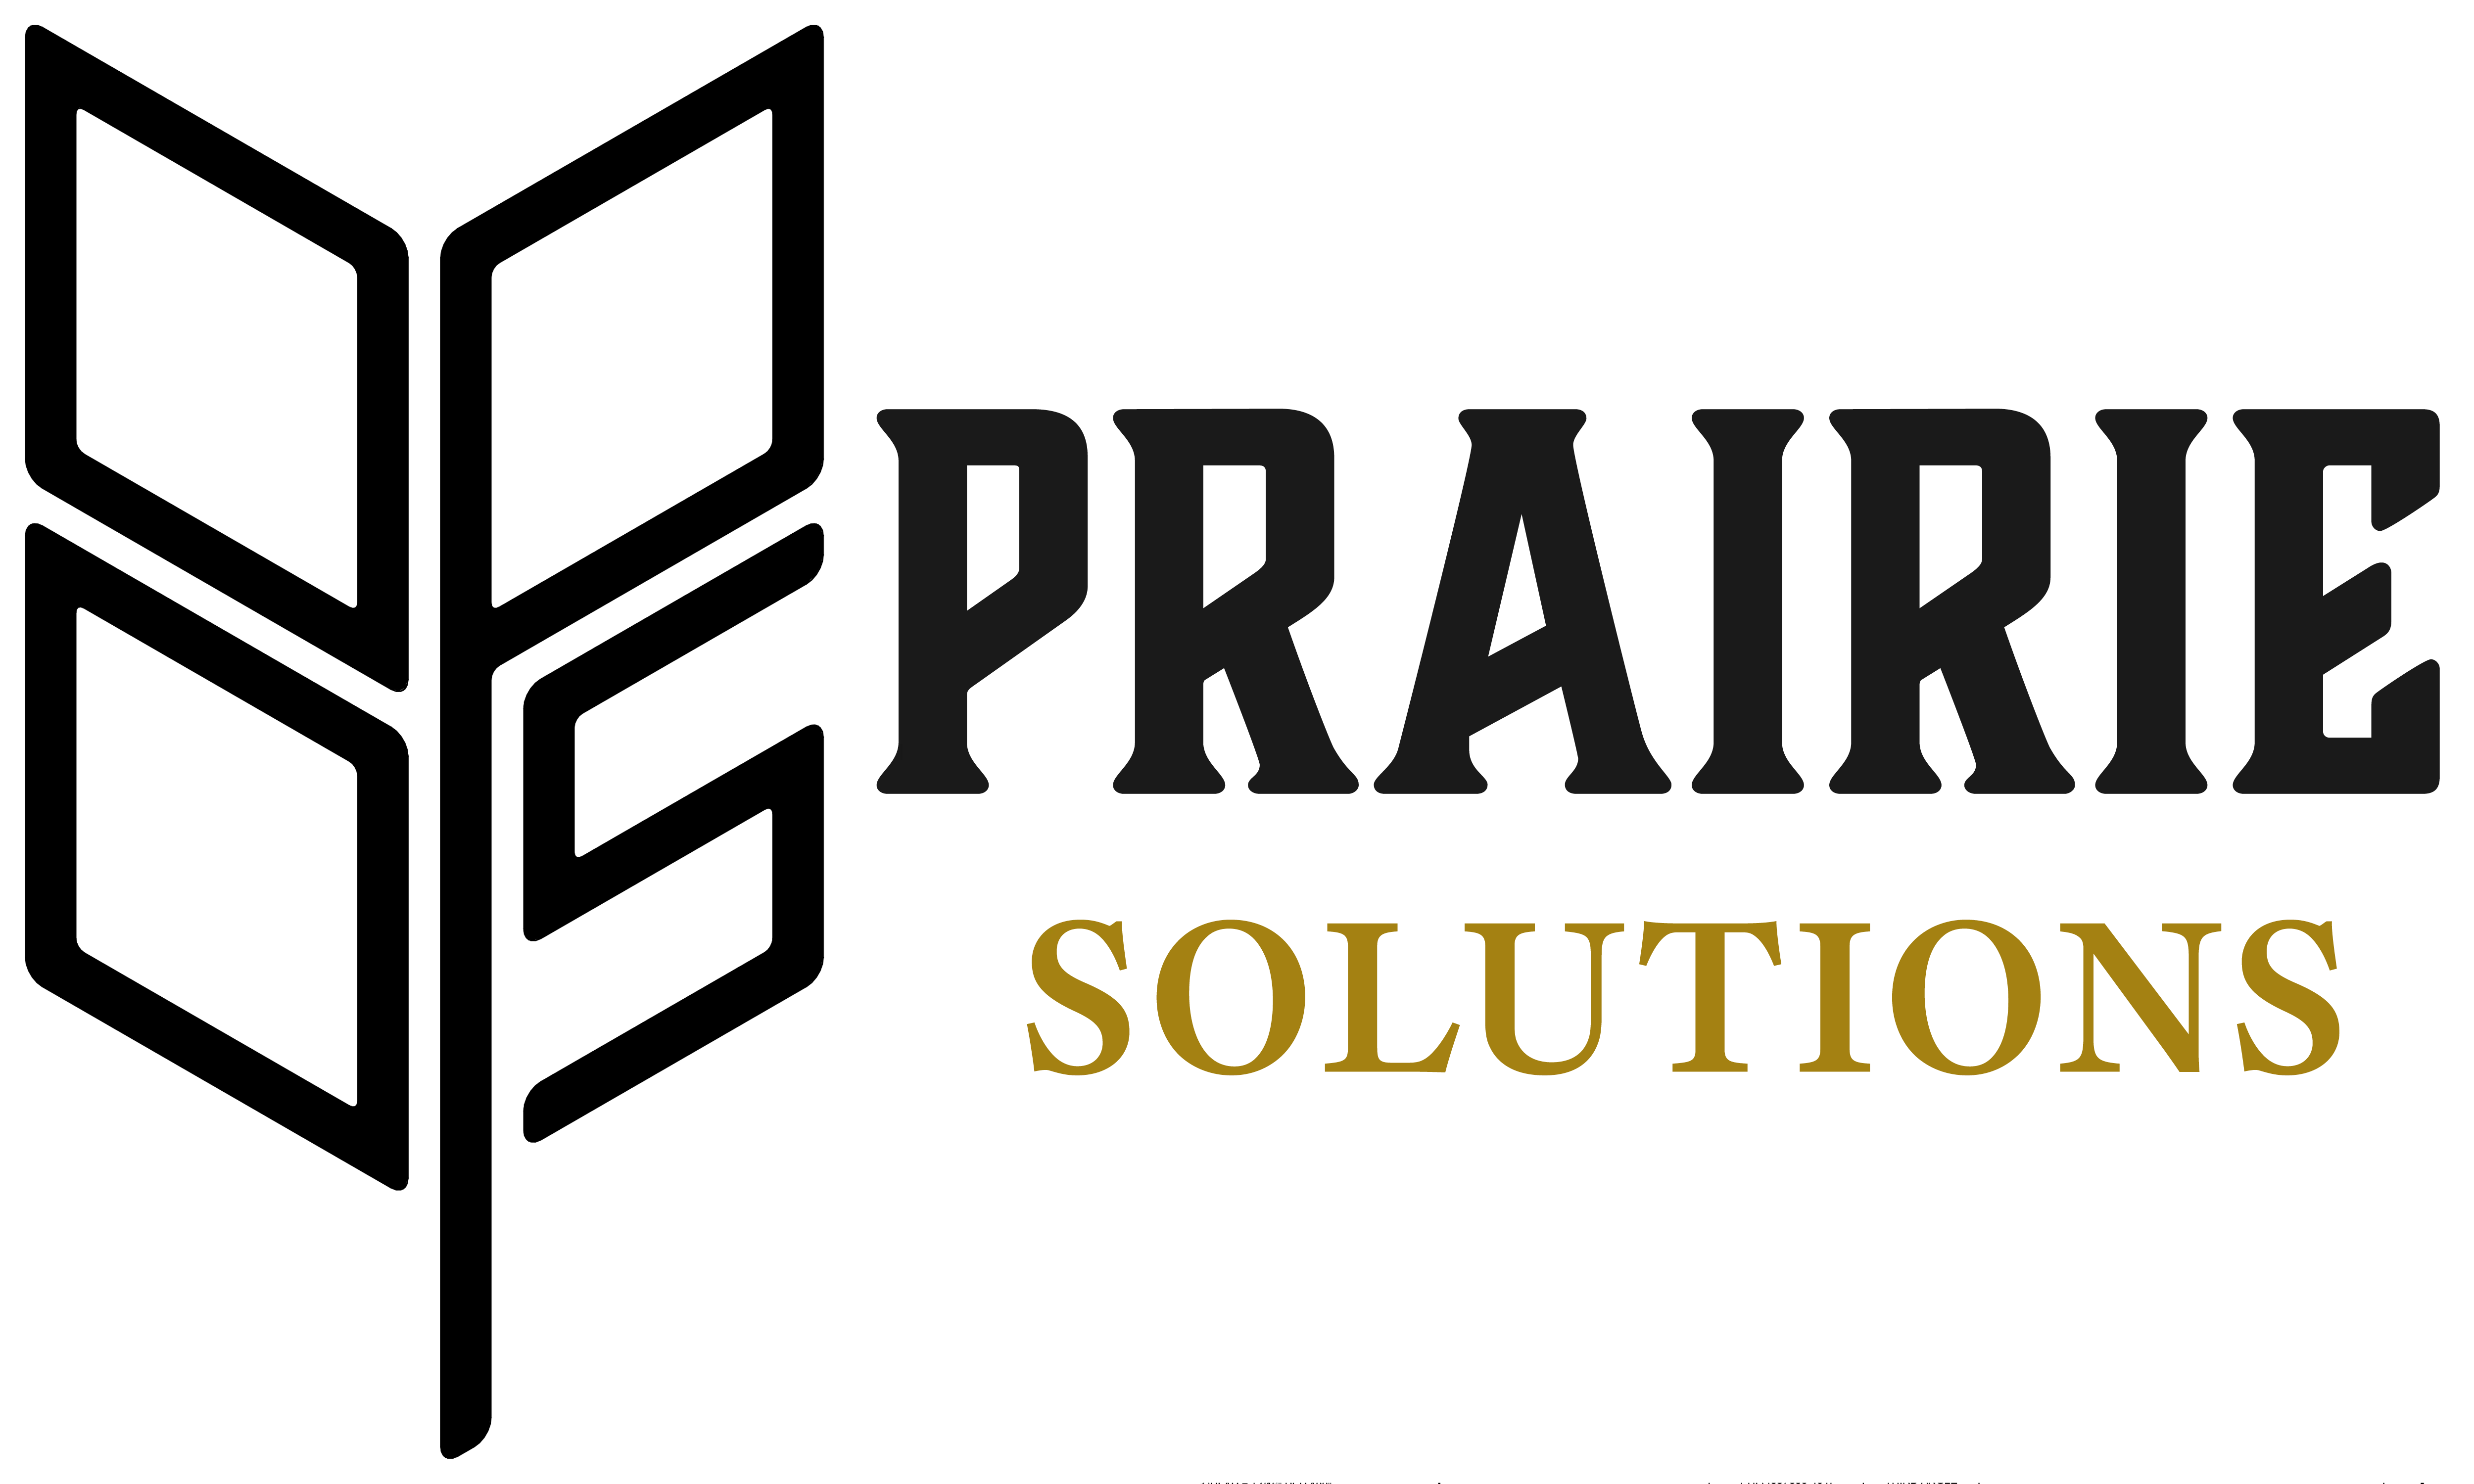 prairie solutions logo icon depicting a draft wheat kernel in black, gray, and gold